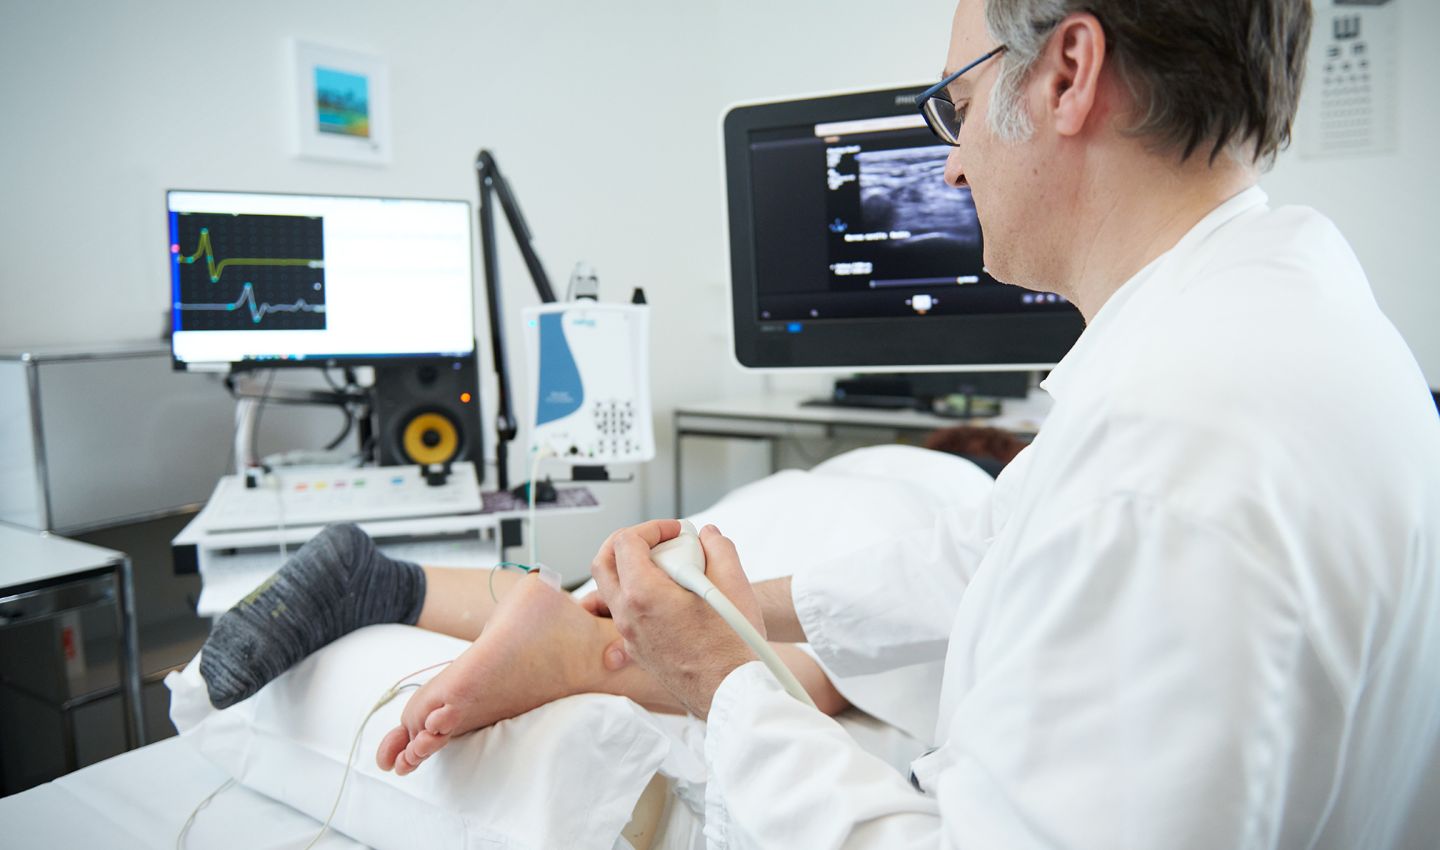 Physician performs EMG examination on patient